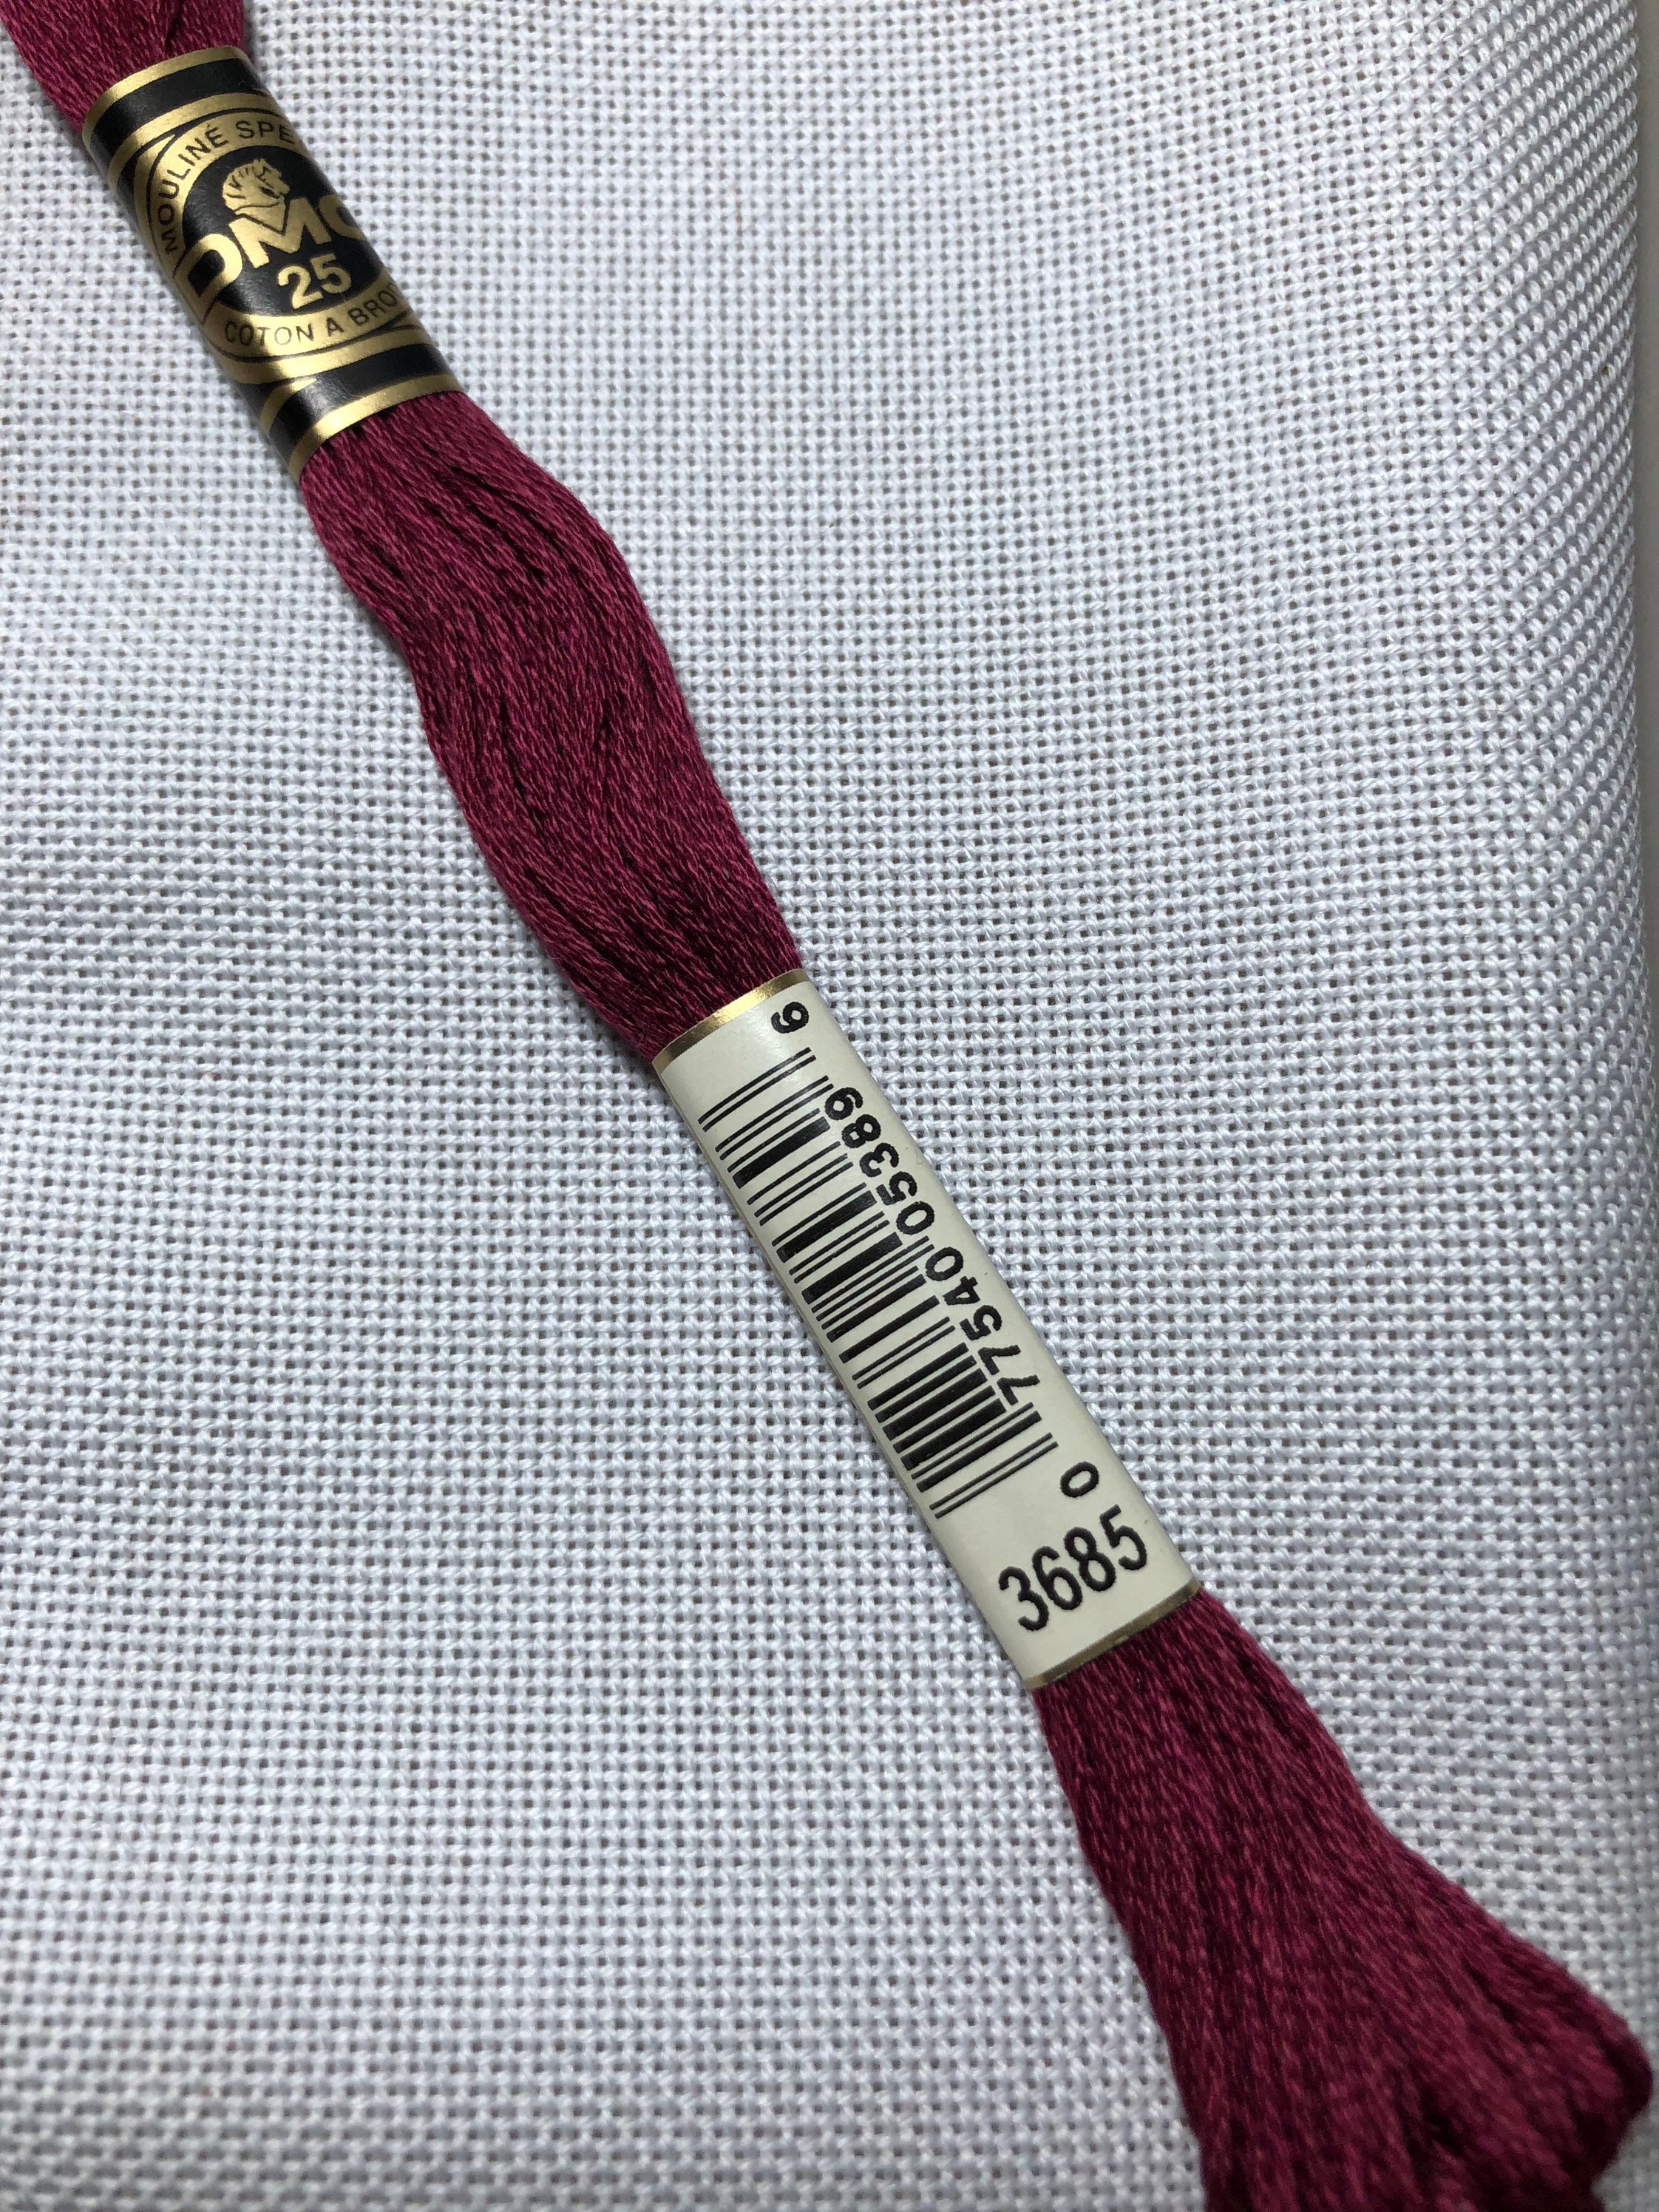 DMC 105 Variegated Embroidery Floss Brown Shaded Ombre 